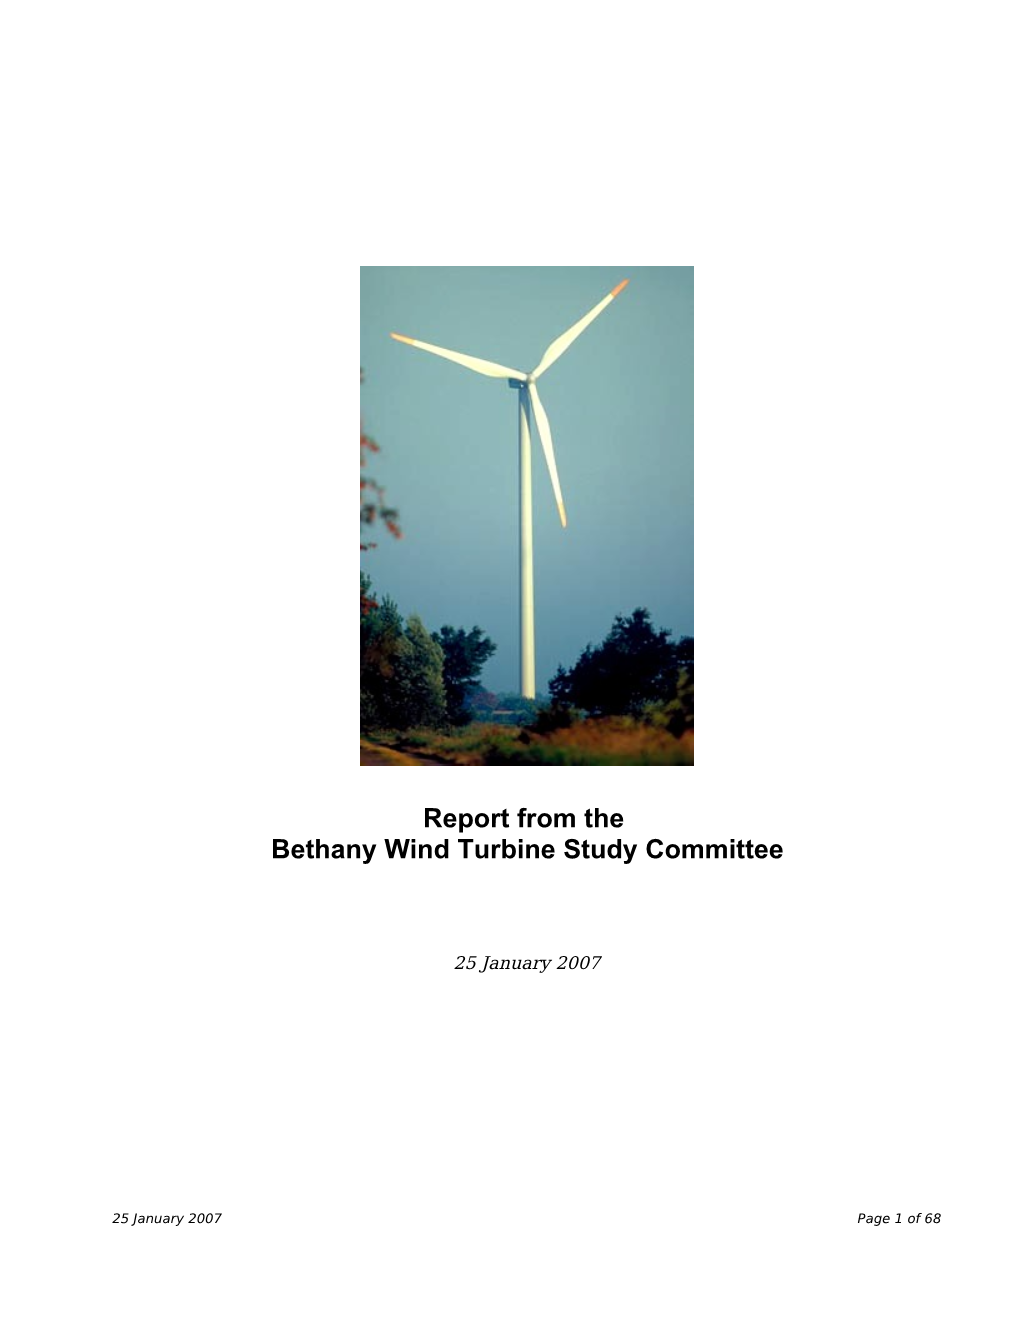 Report from the Bethany Wind Turbine Study Committee